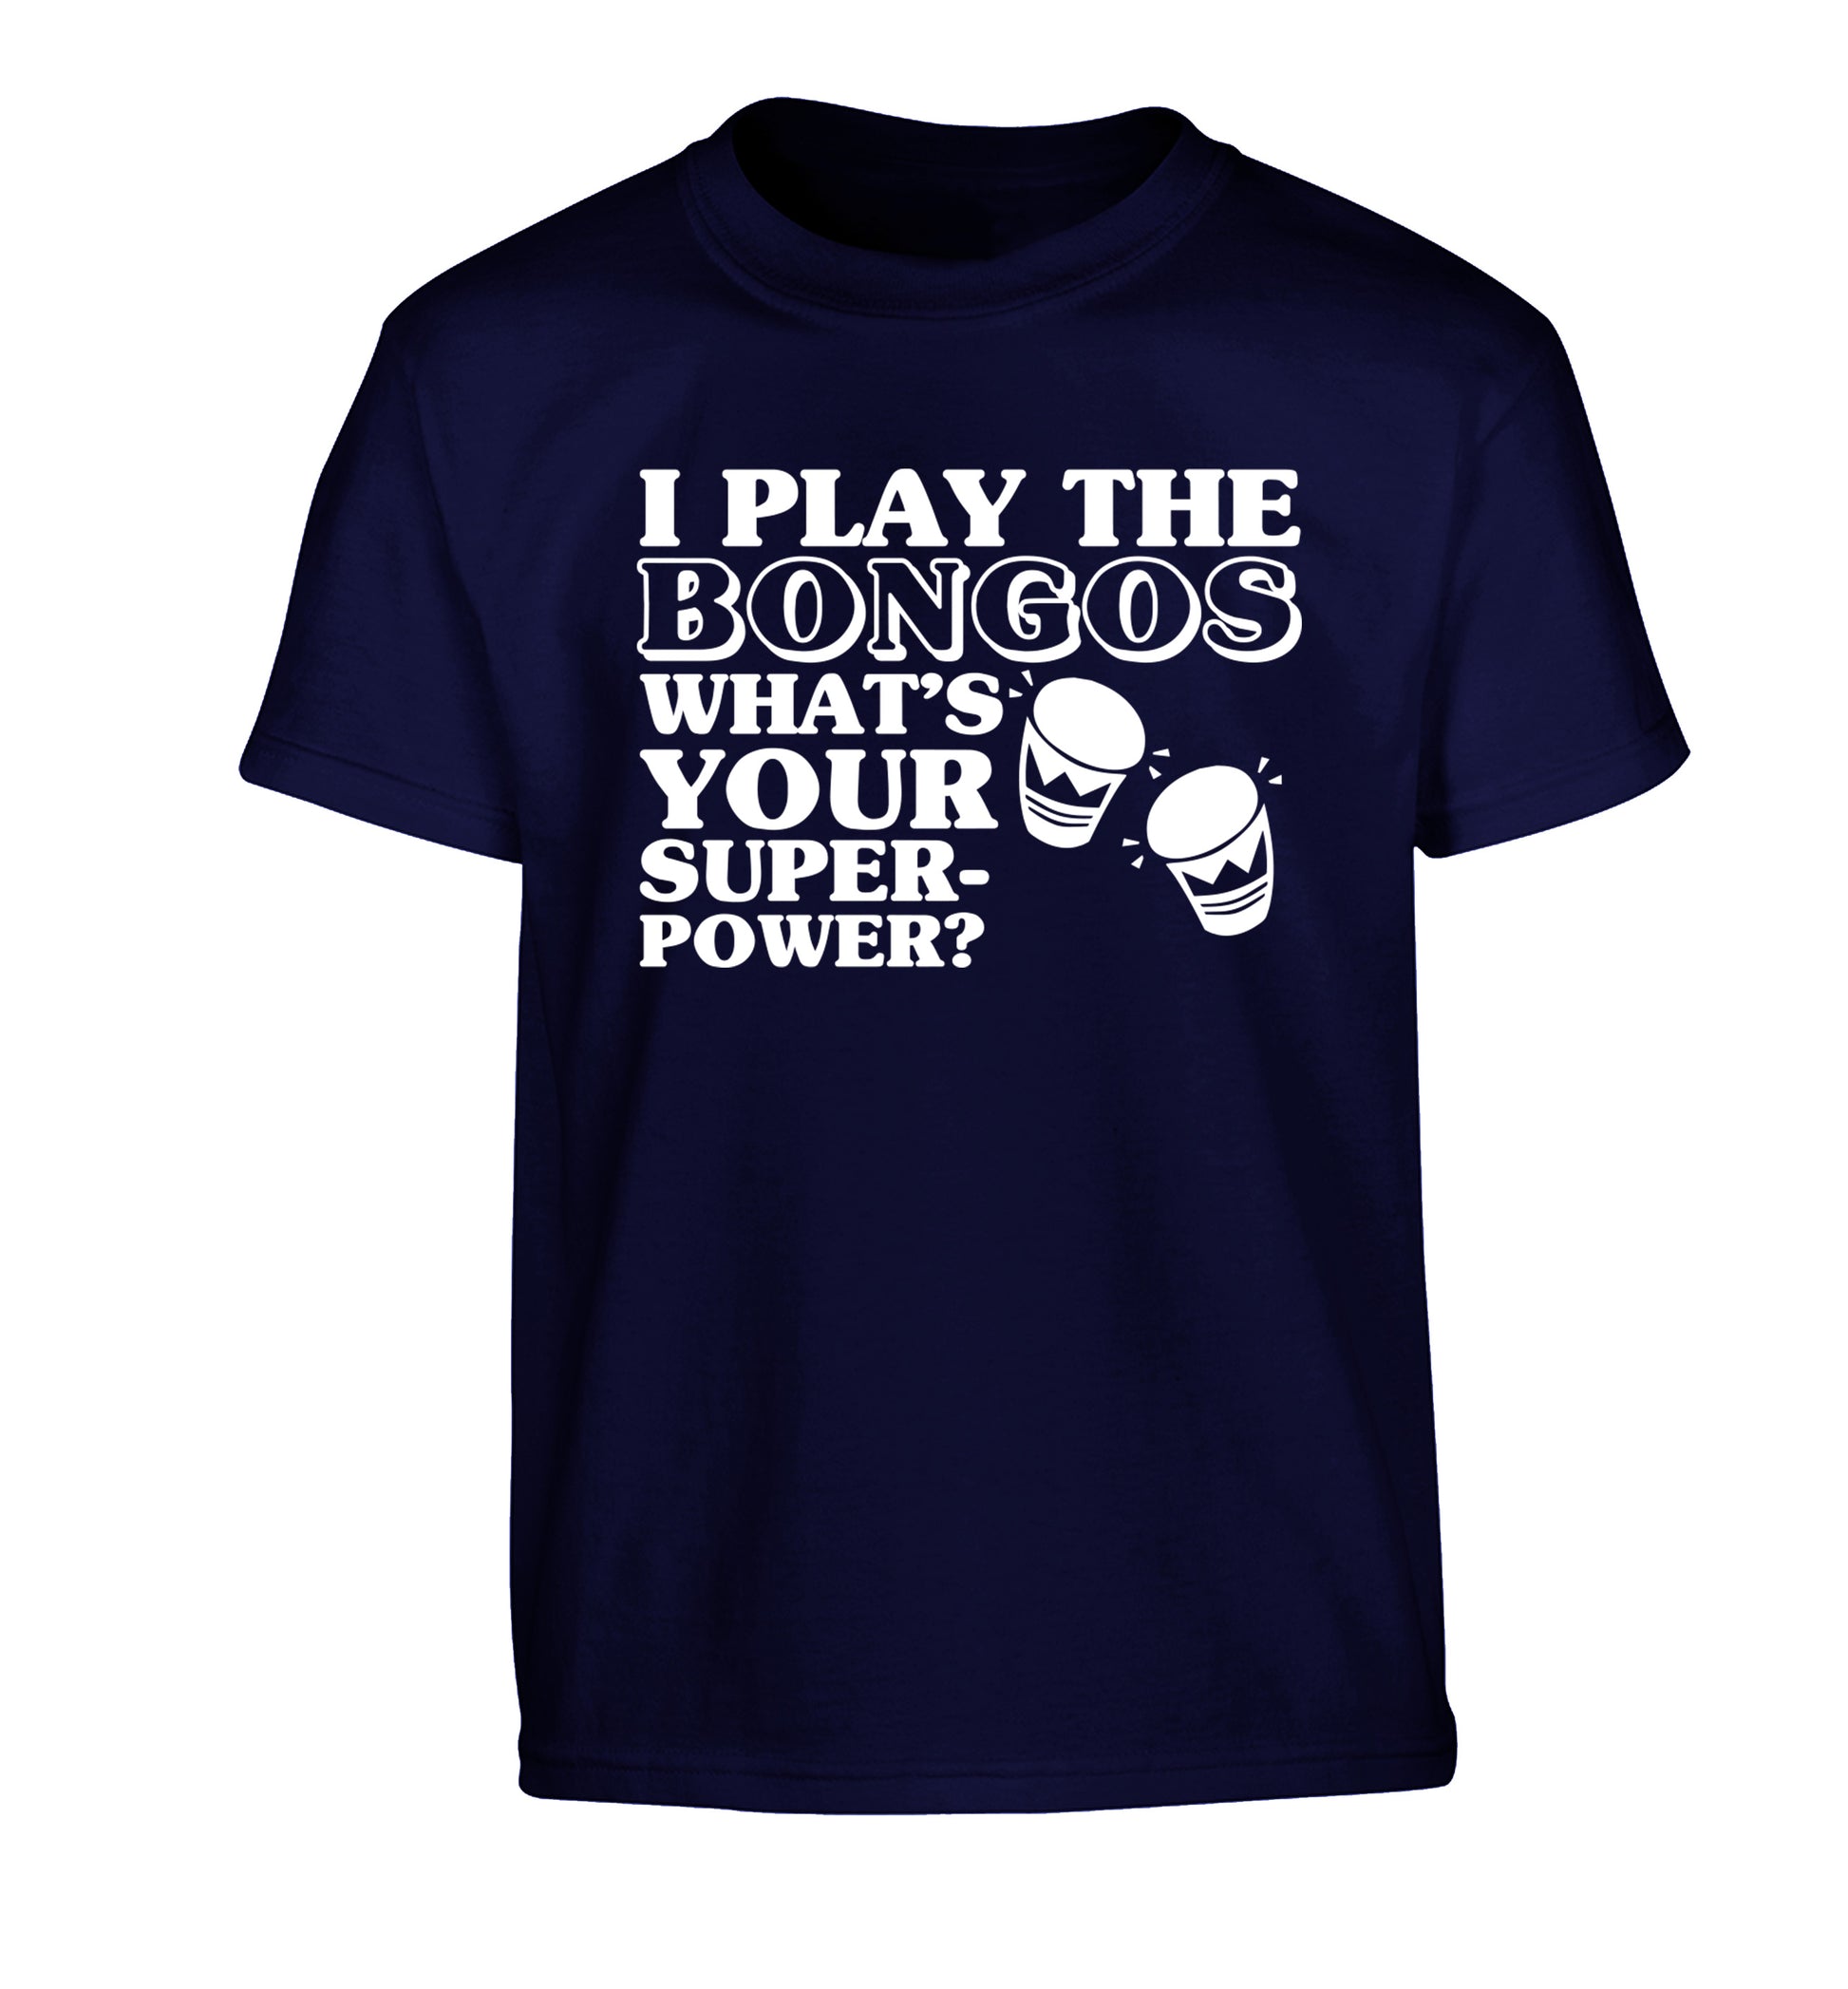 I play the bongos what's your superpower? Children's navy Tshirt 12-14 Years